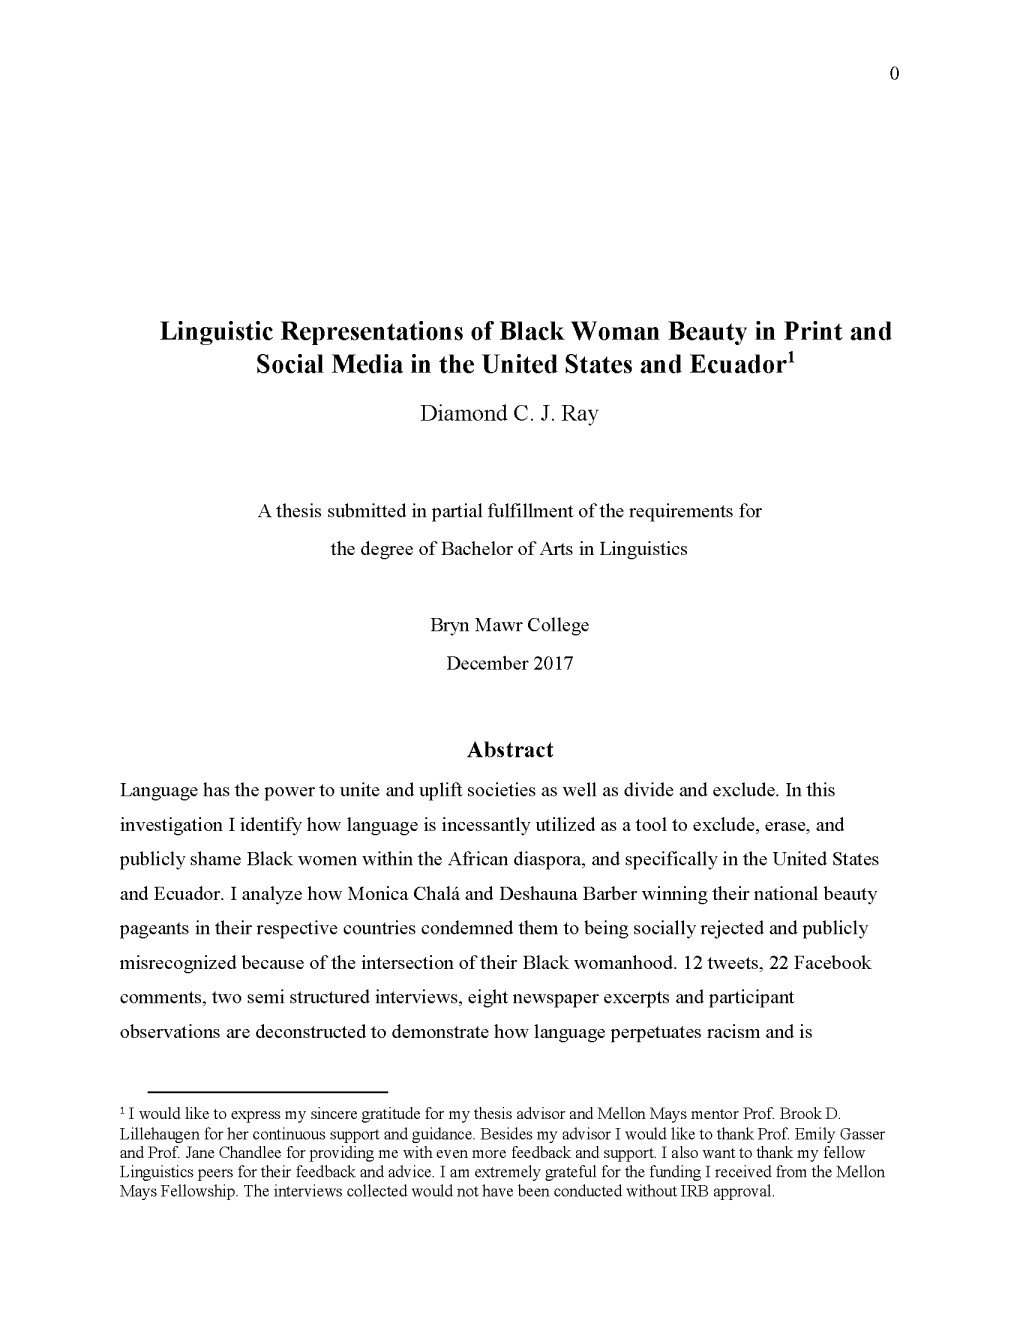 Linguistic Representations of Black Woman Beauty in Print and Social Media in the United States and Ecuadorl